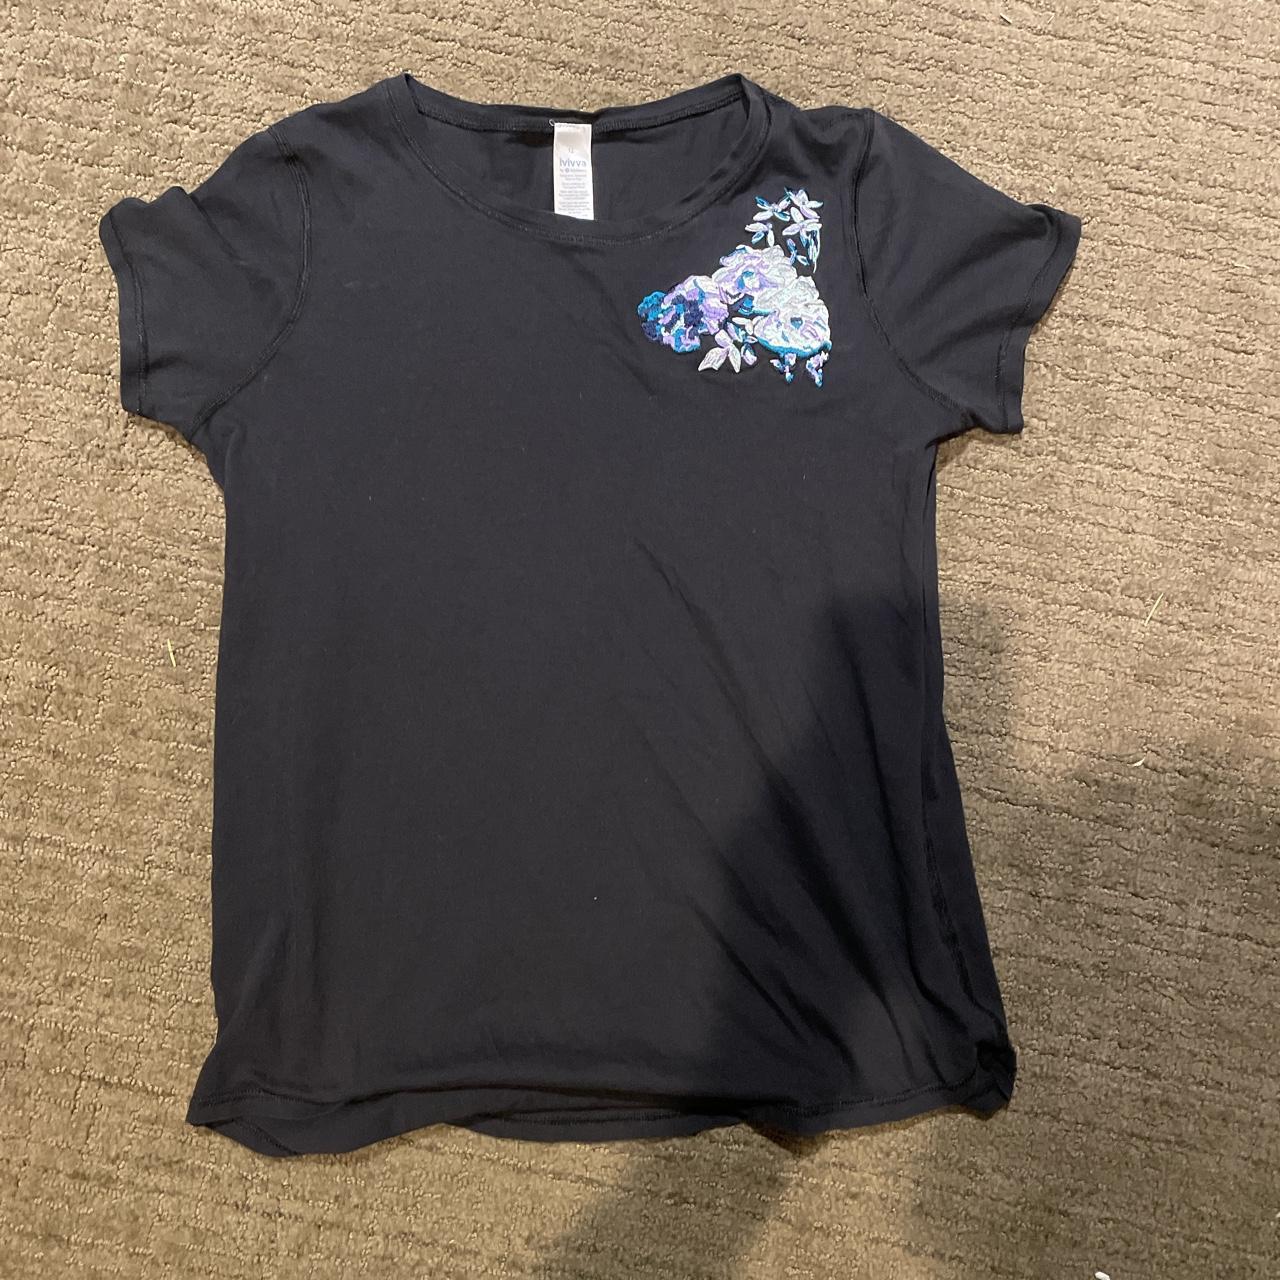 Lululemon Kids Floral Shirt Size 12, This shirt is